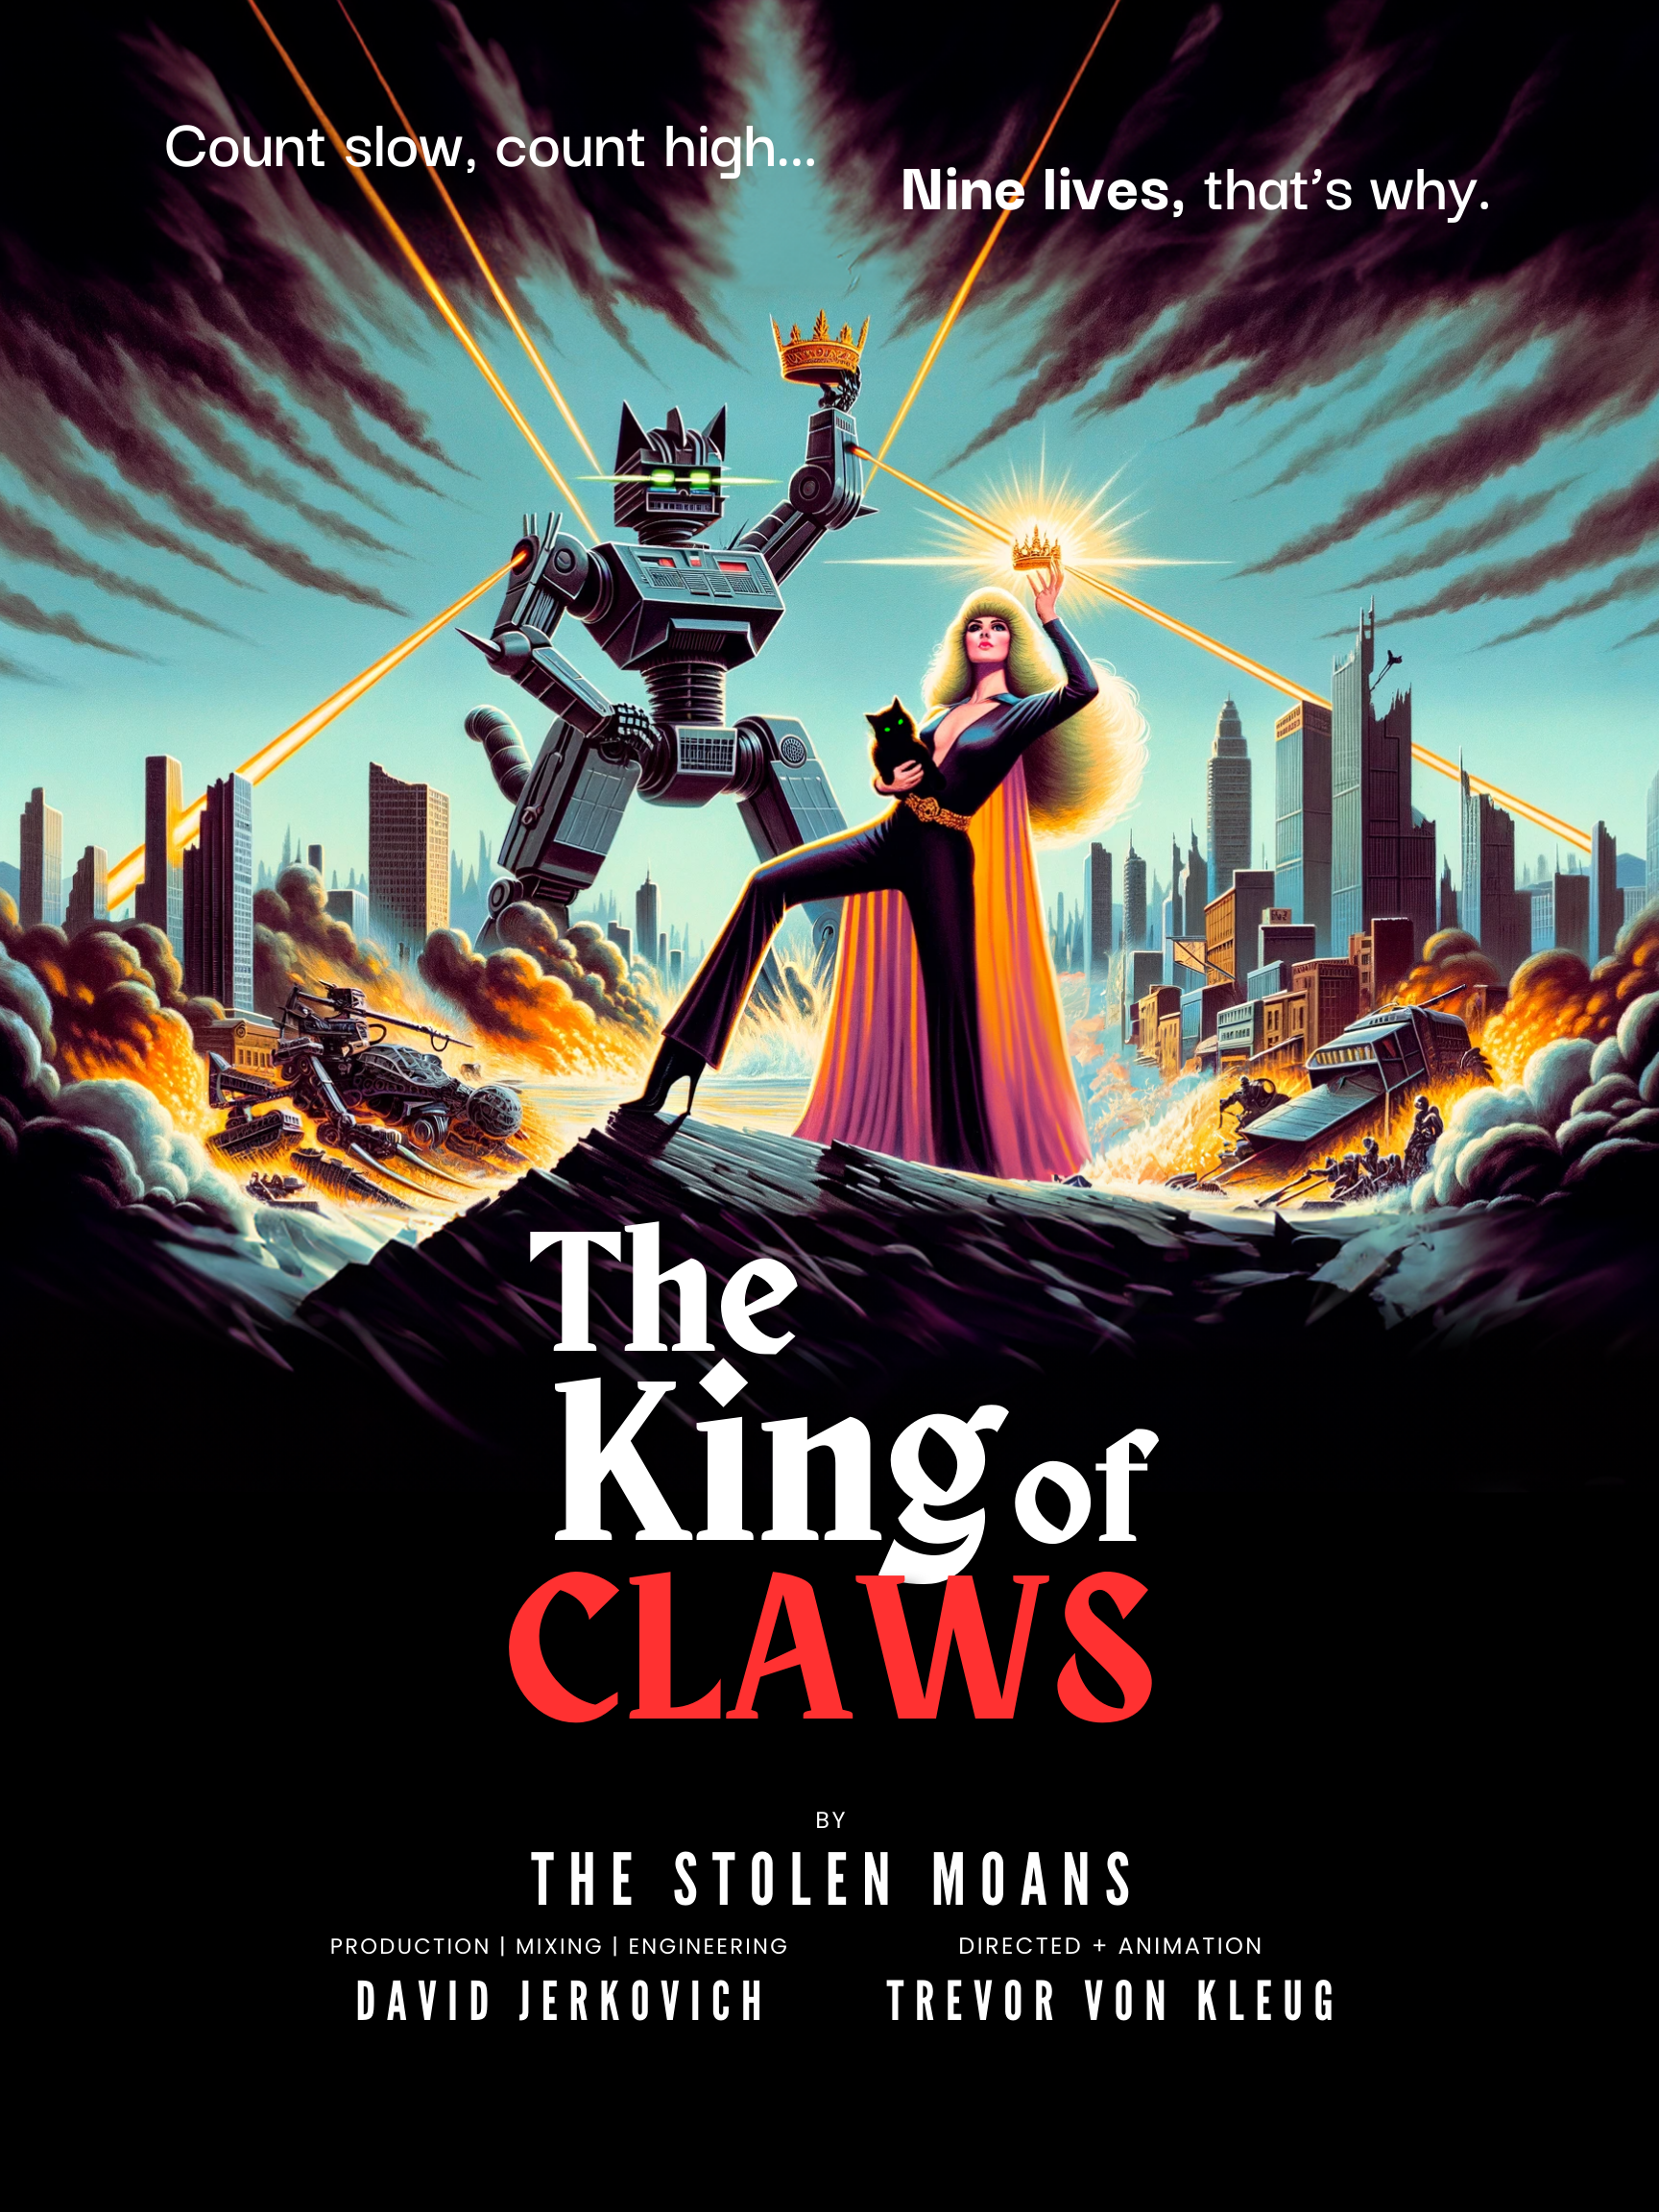 Official movie poster for the award winning The King of Claws animated music video by The Stolen Moans